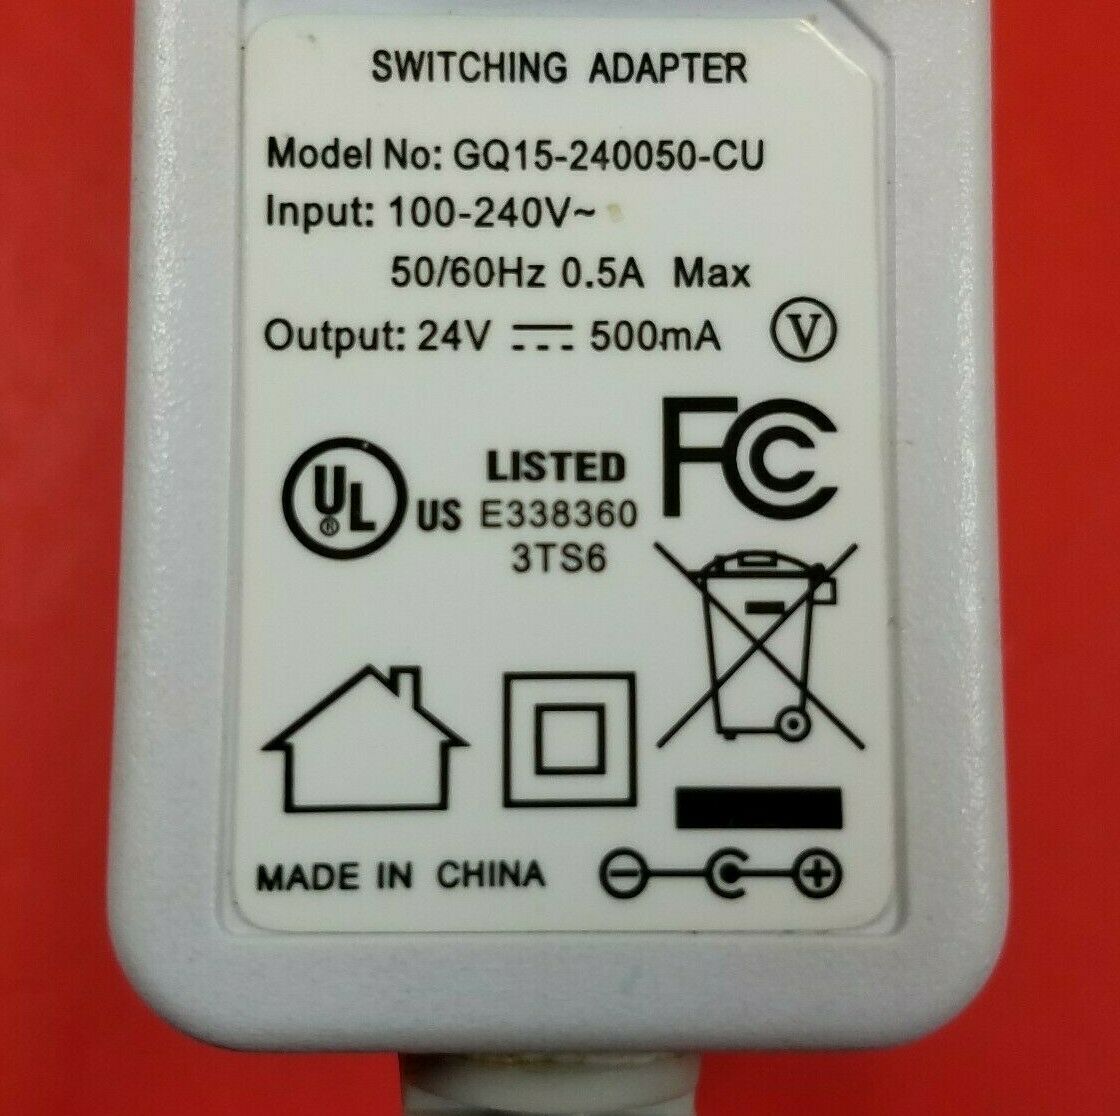 Switching Adaptor GQ15-240050-CU Power Supply 24V - 500mA AC/DC Adapter Charger Type: AC/DC Adapter Features: new MP - Click Image to Close